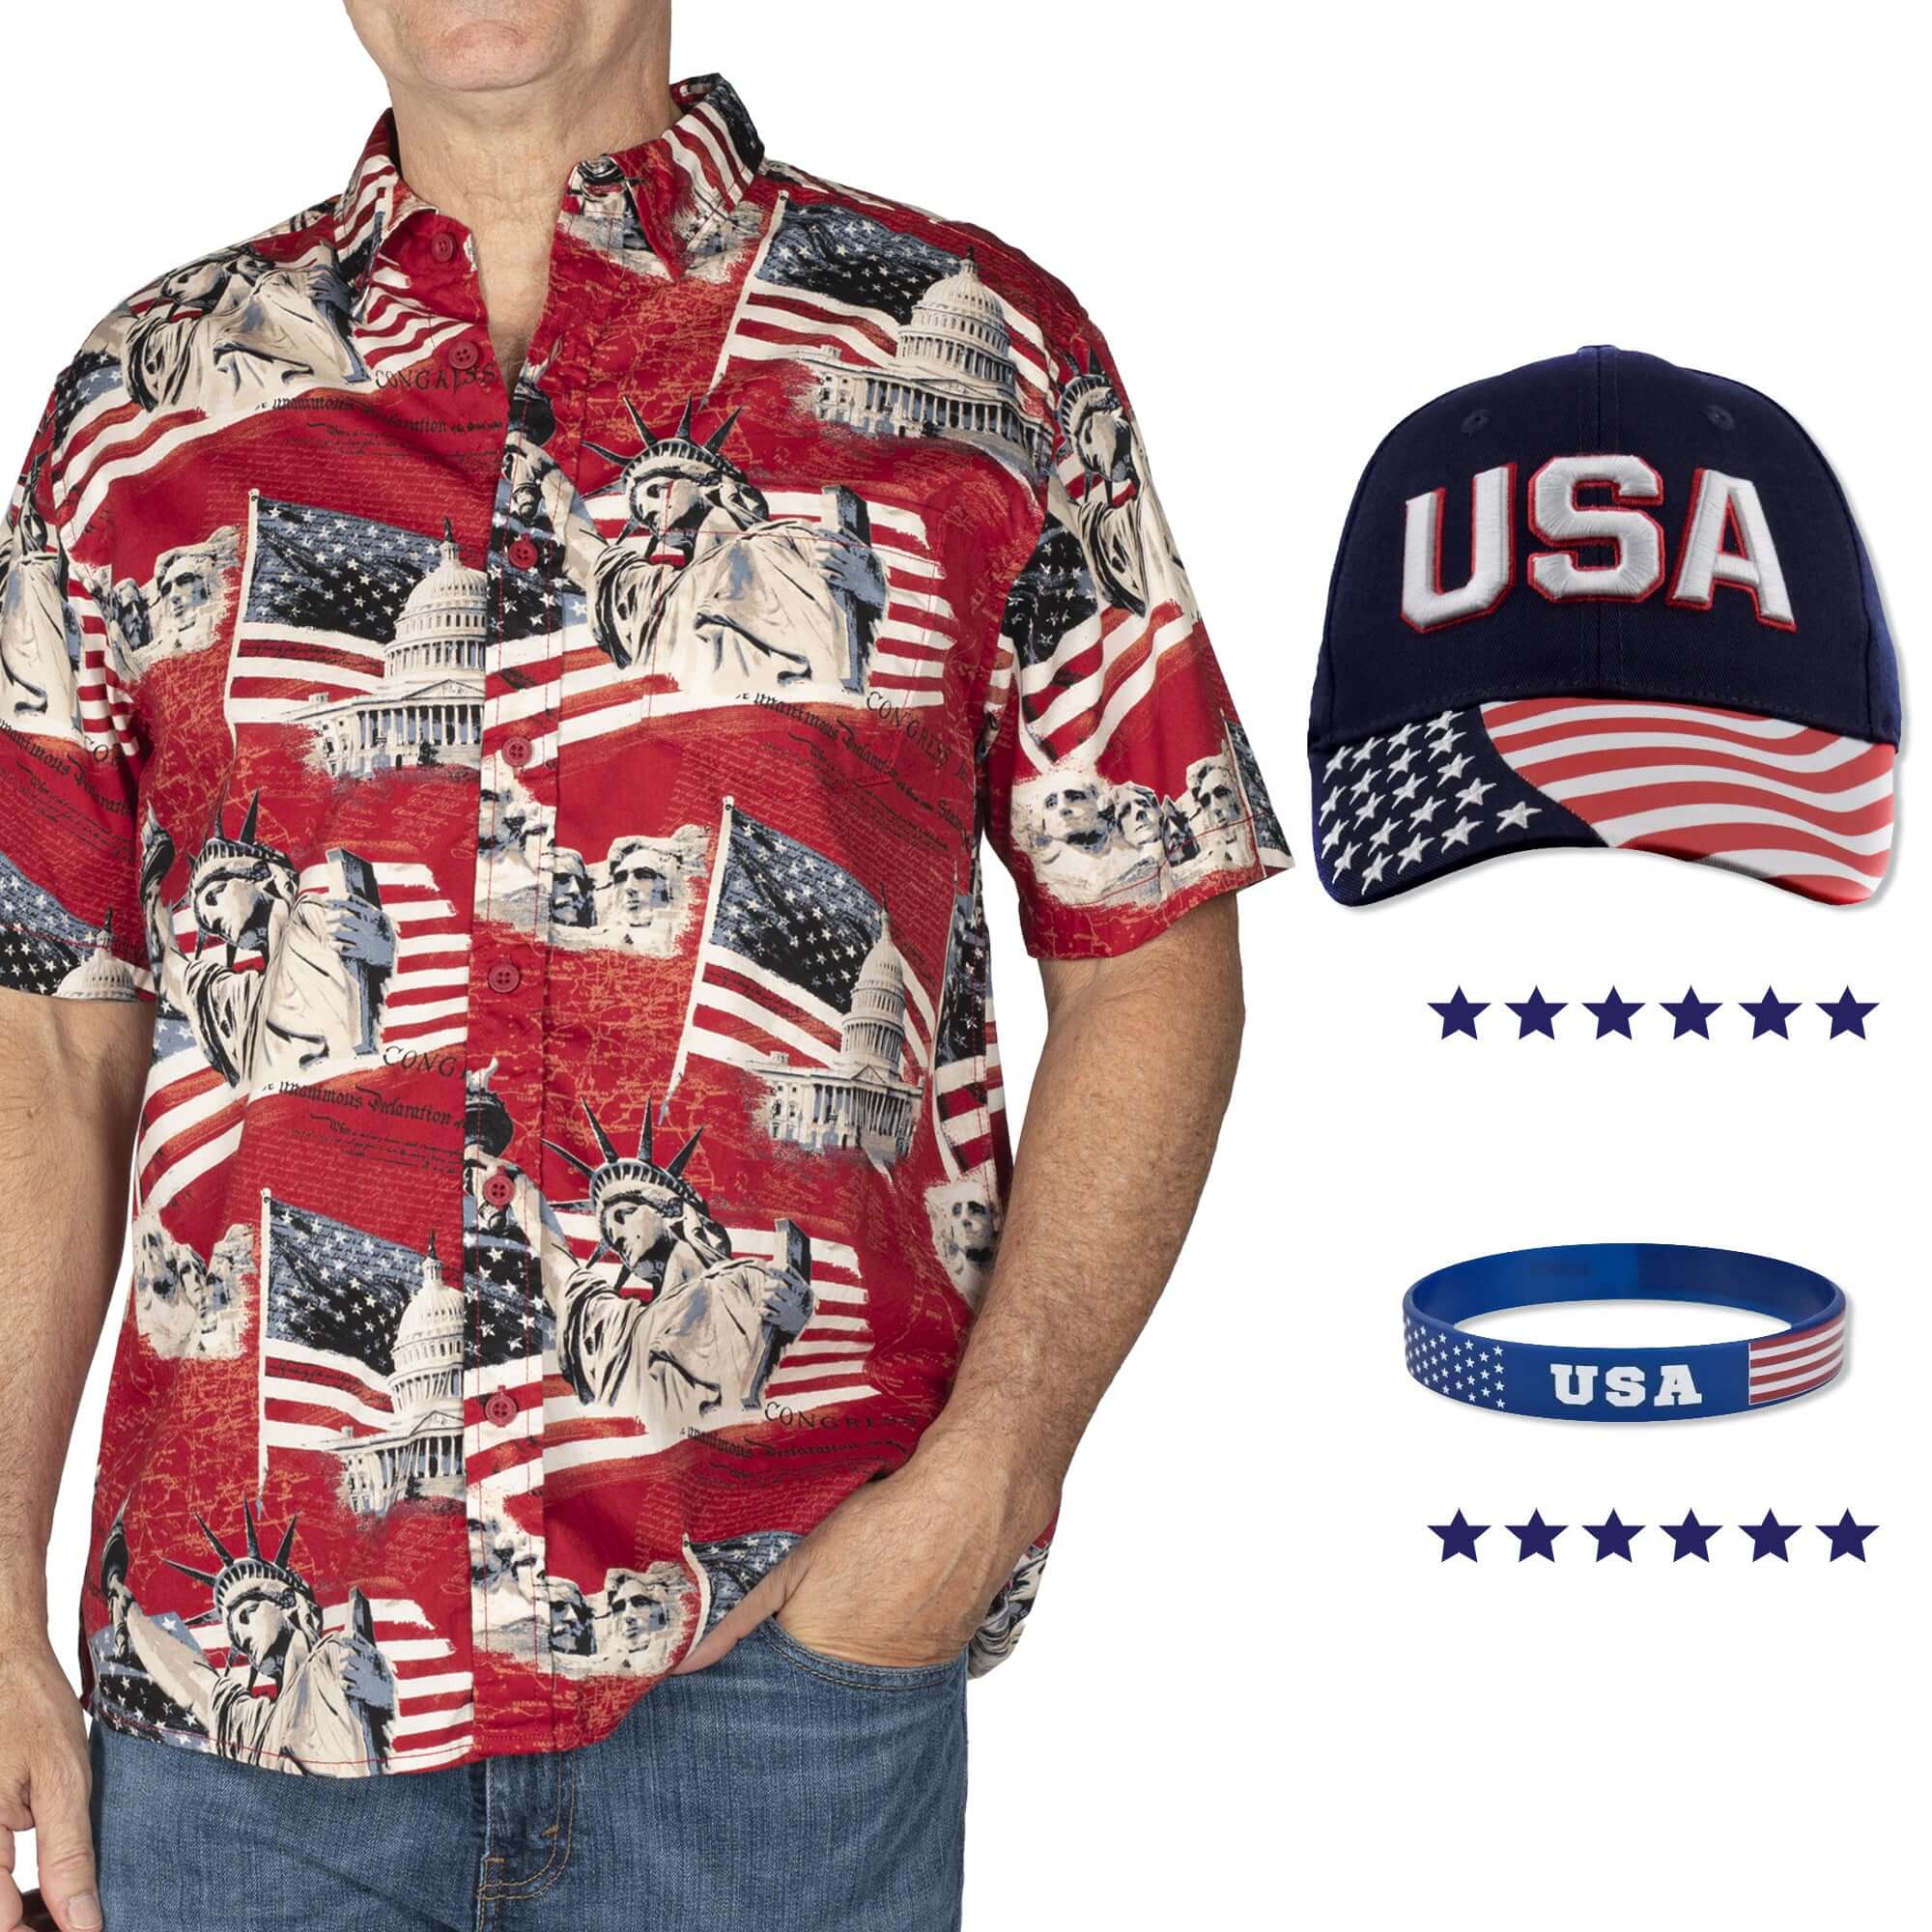 Men's USA Icons Button Down Shirt, Hat, and Wristband Bundle